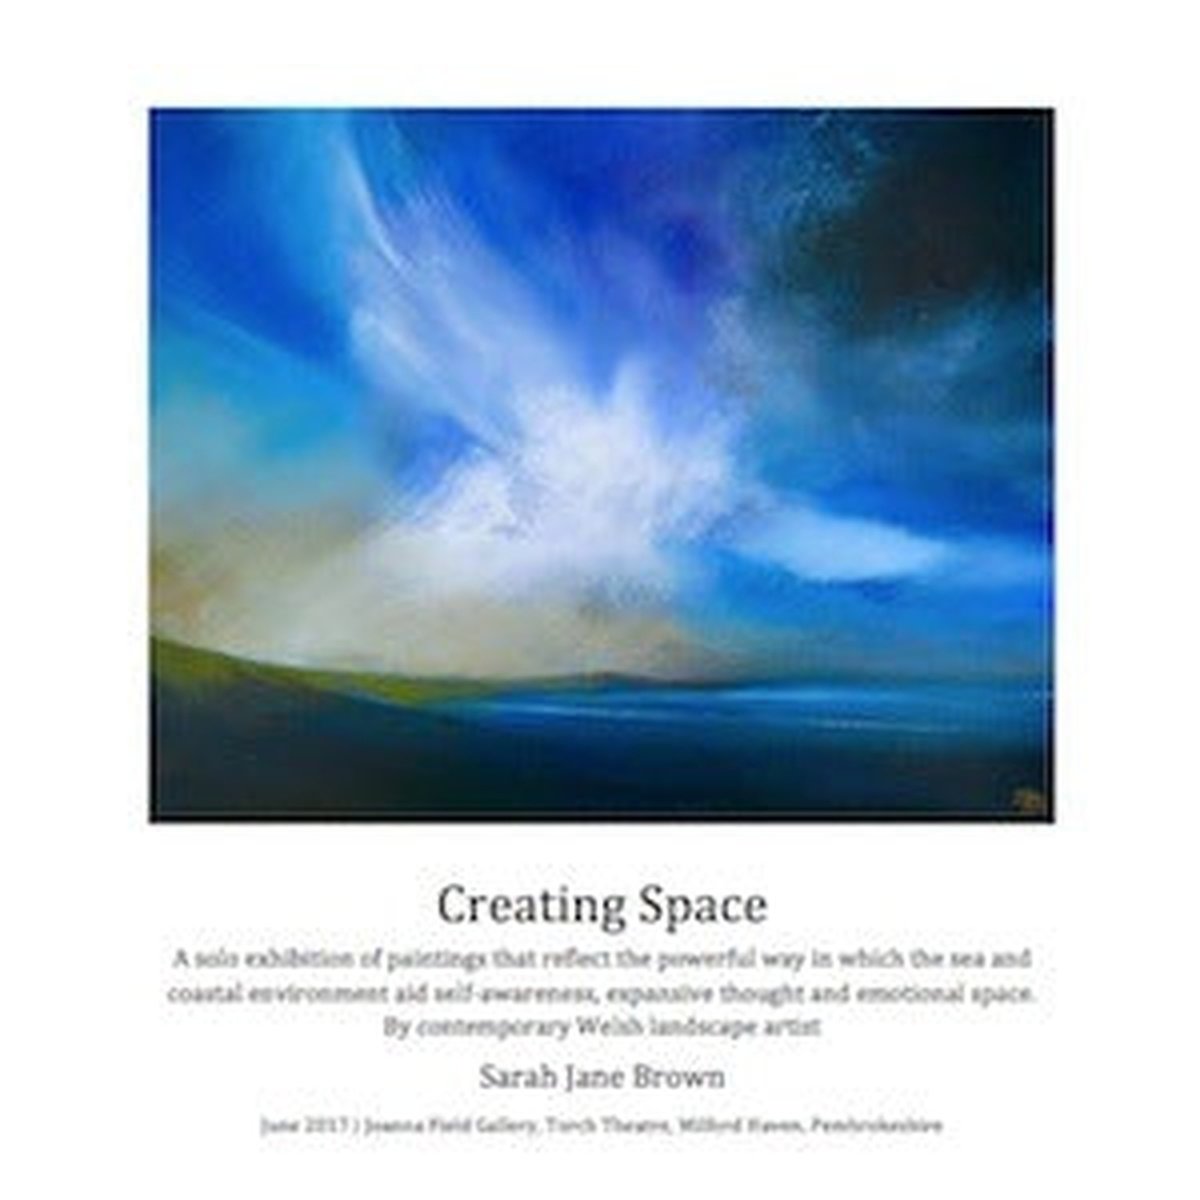 Creating Space exhibition catalogue now available to view online